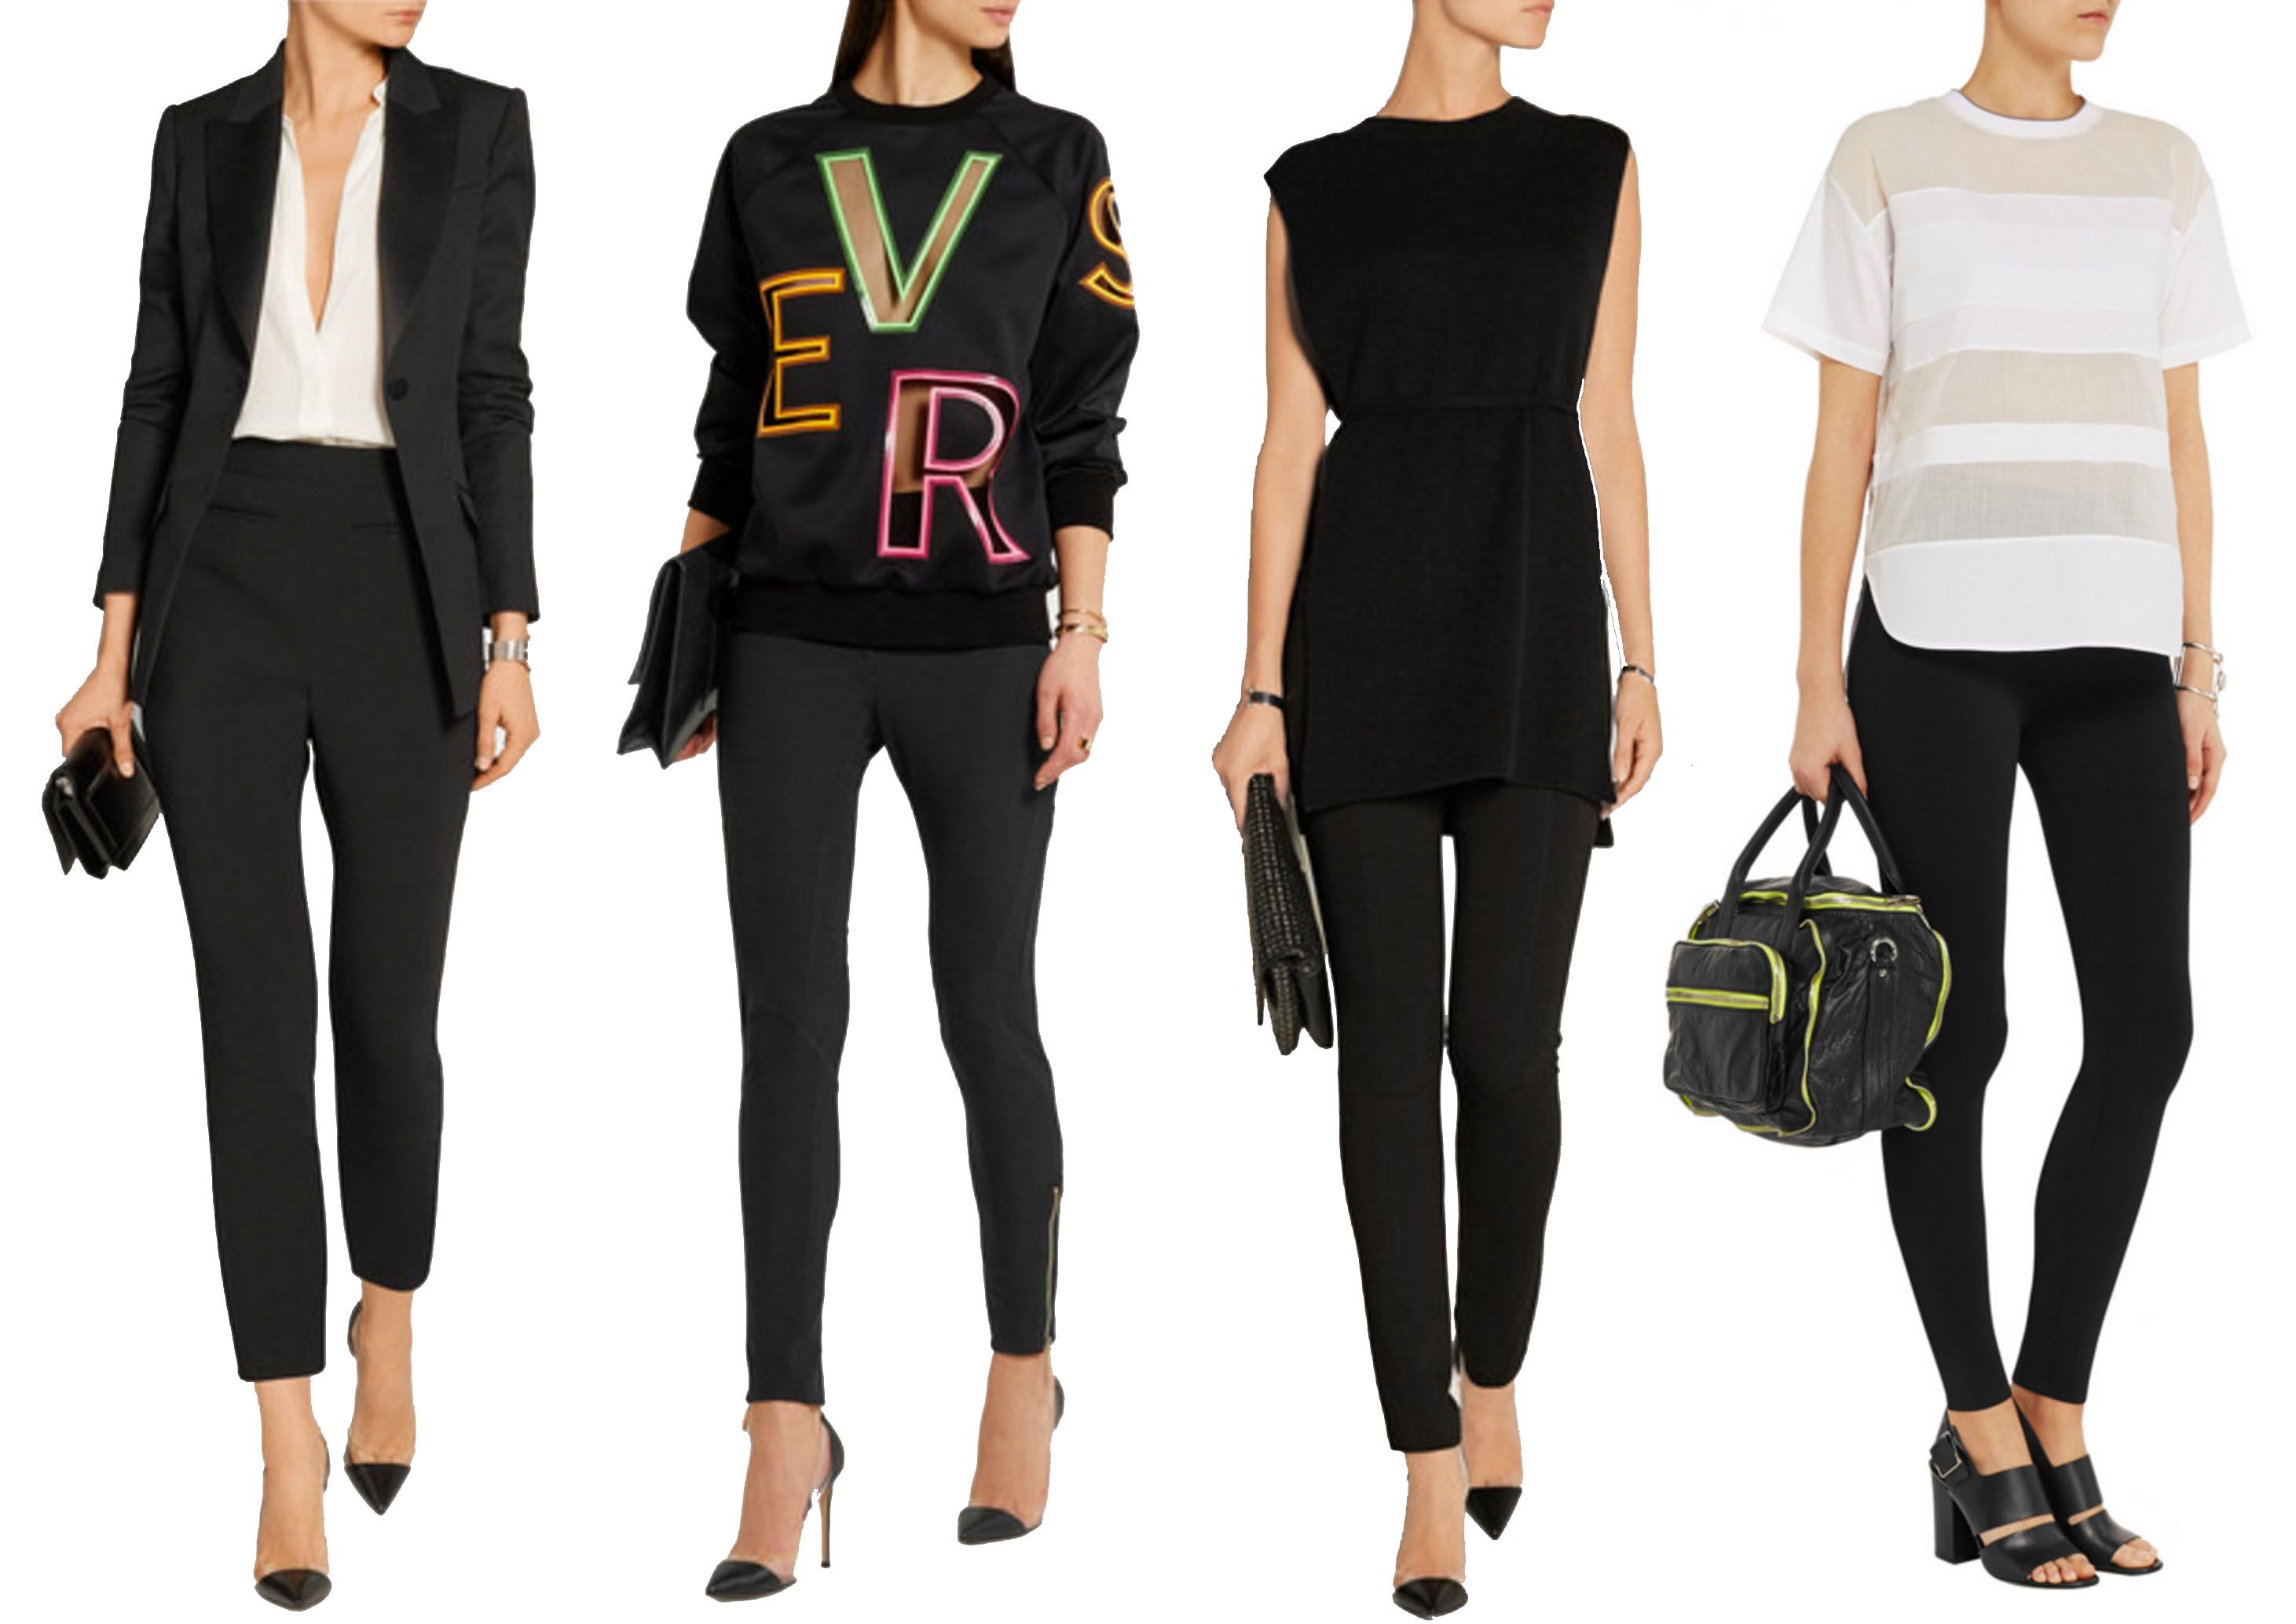 Going to the Office in Leggings?  Why Not, Here Are 4 Tips for Wearing Leggings at the Office